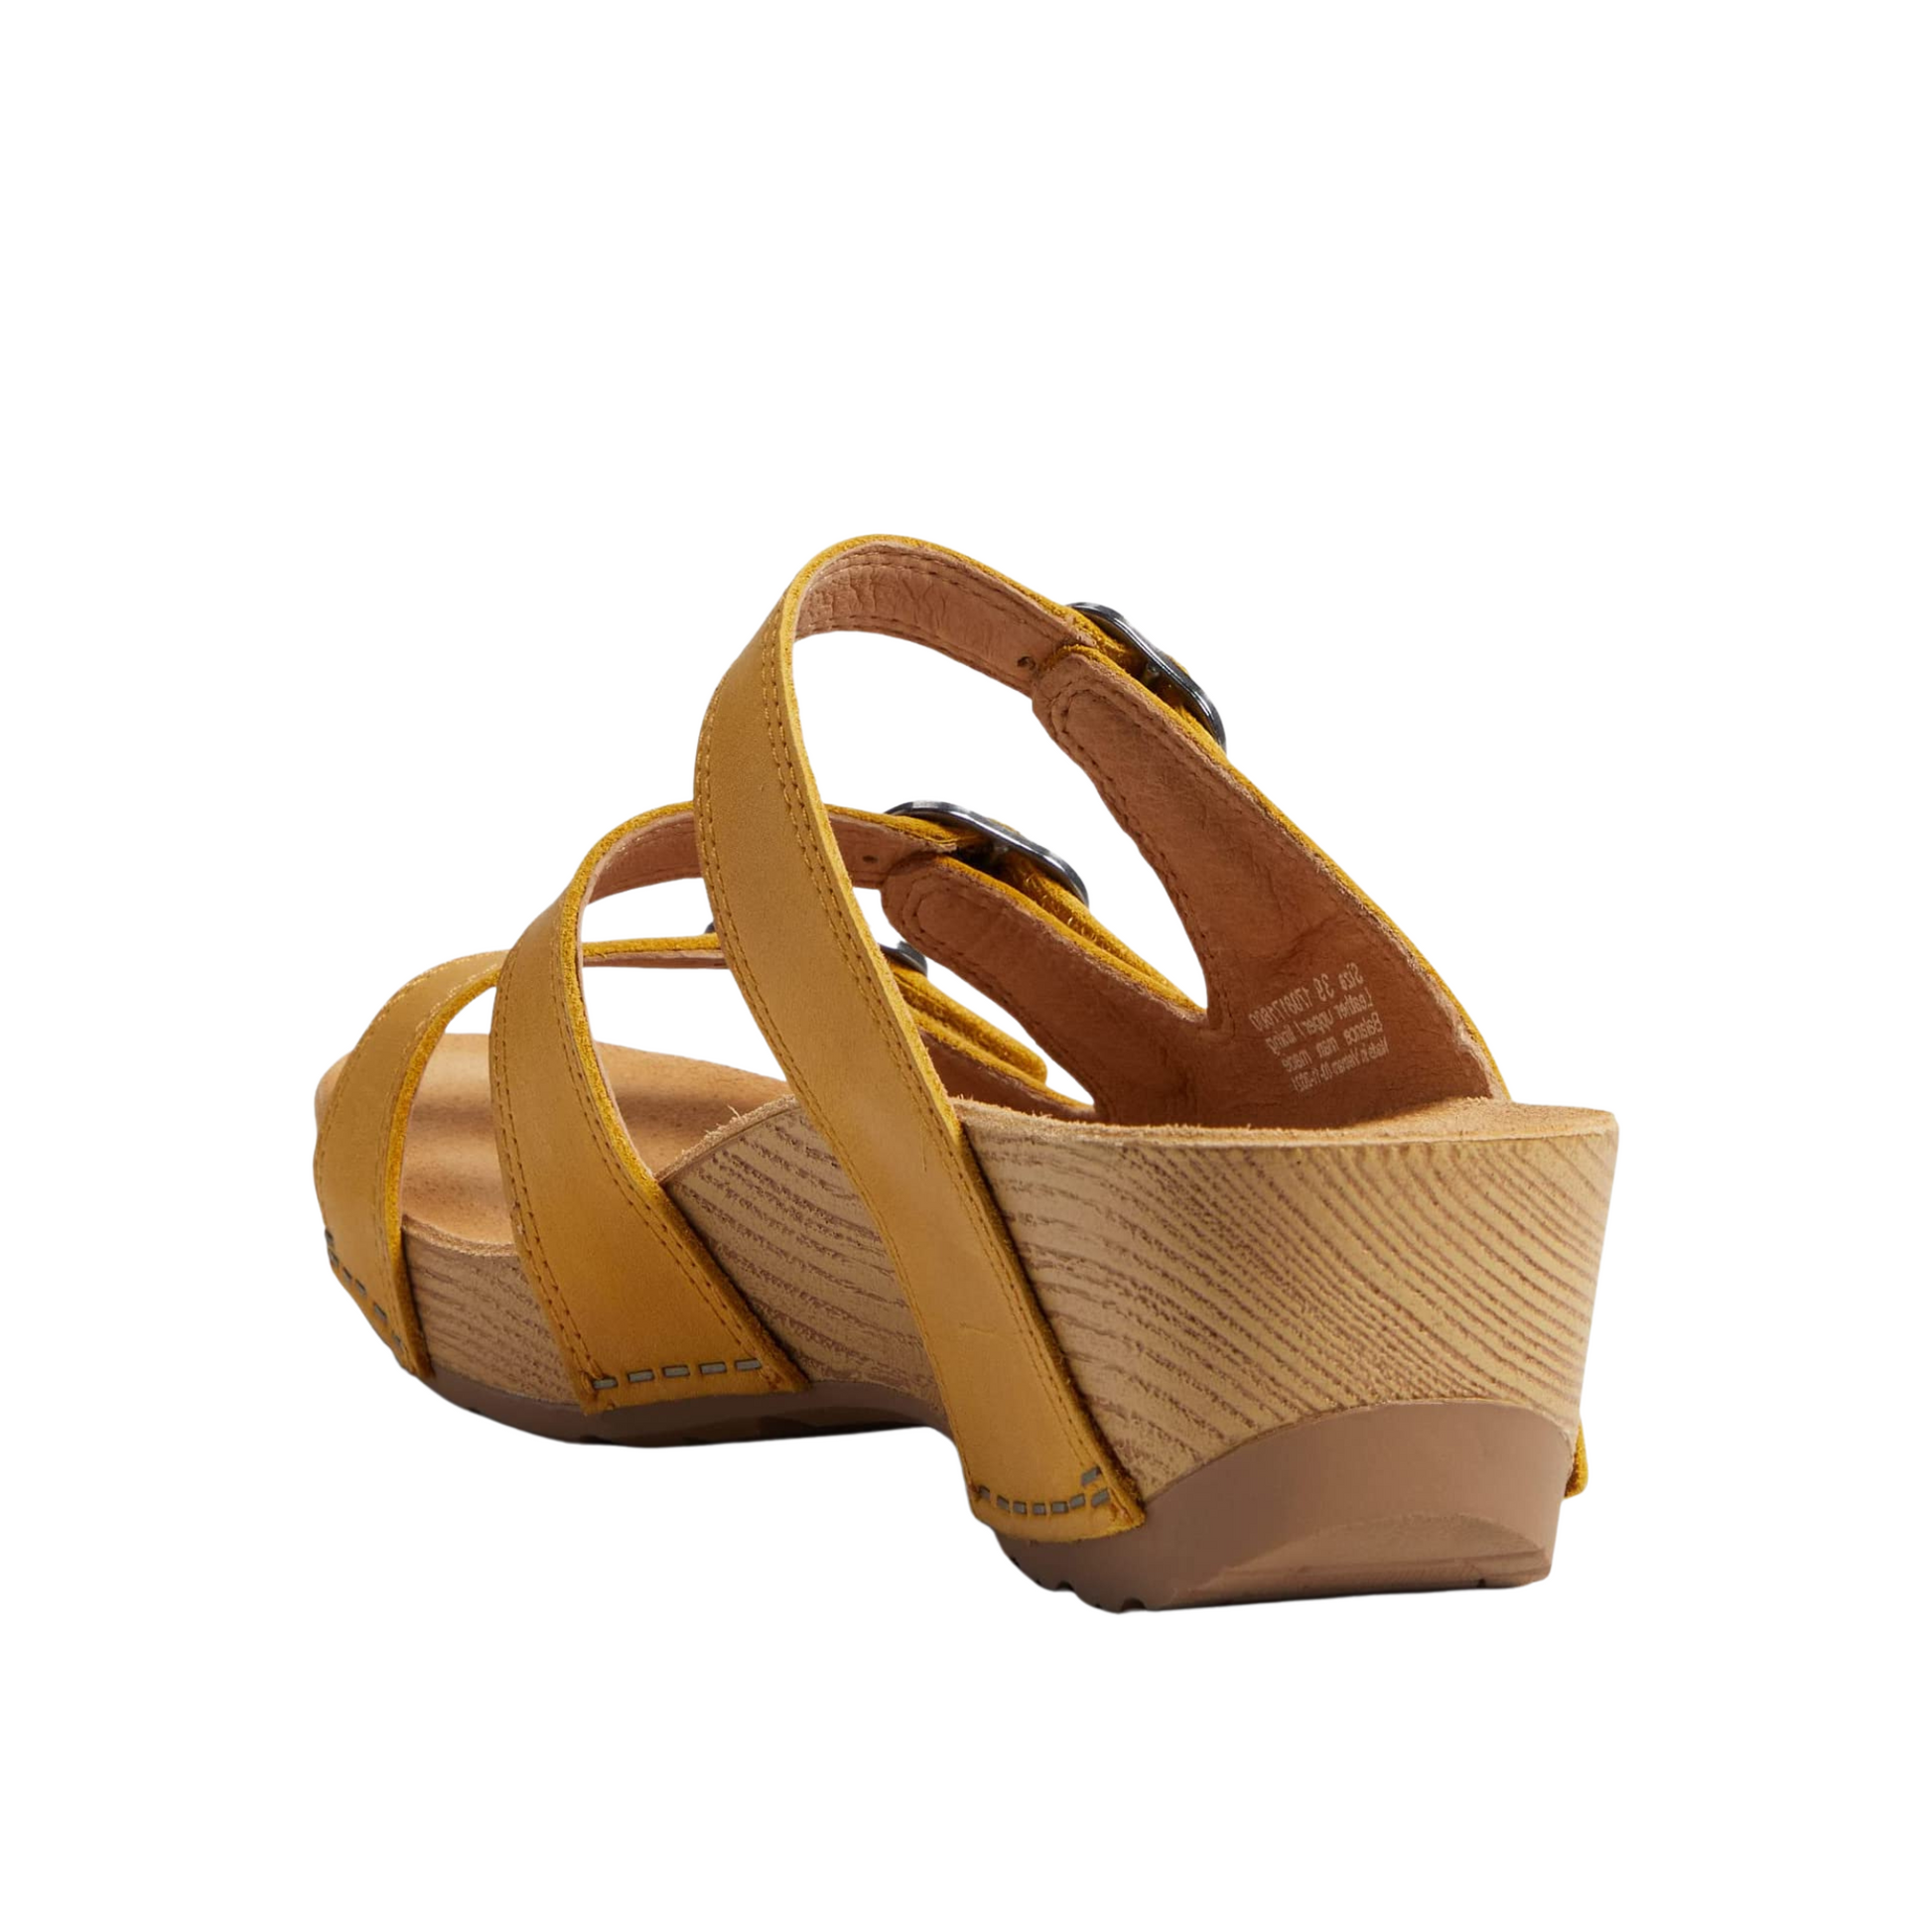 A back angle view of a wedged sandal with three yellow leather straps.